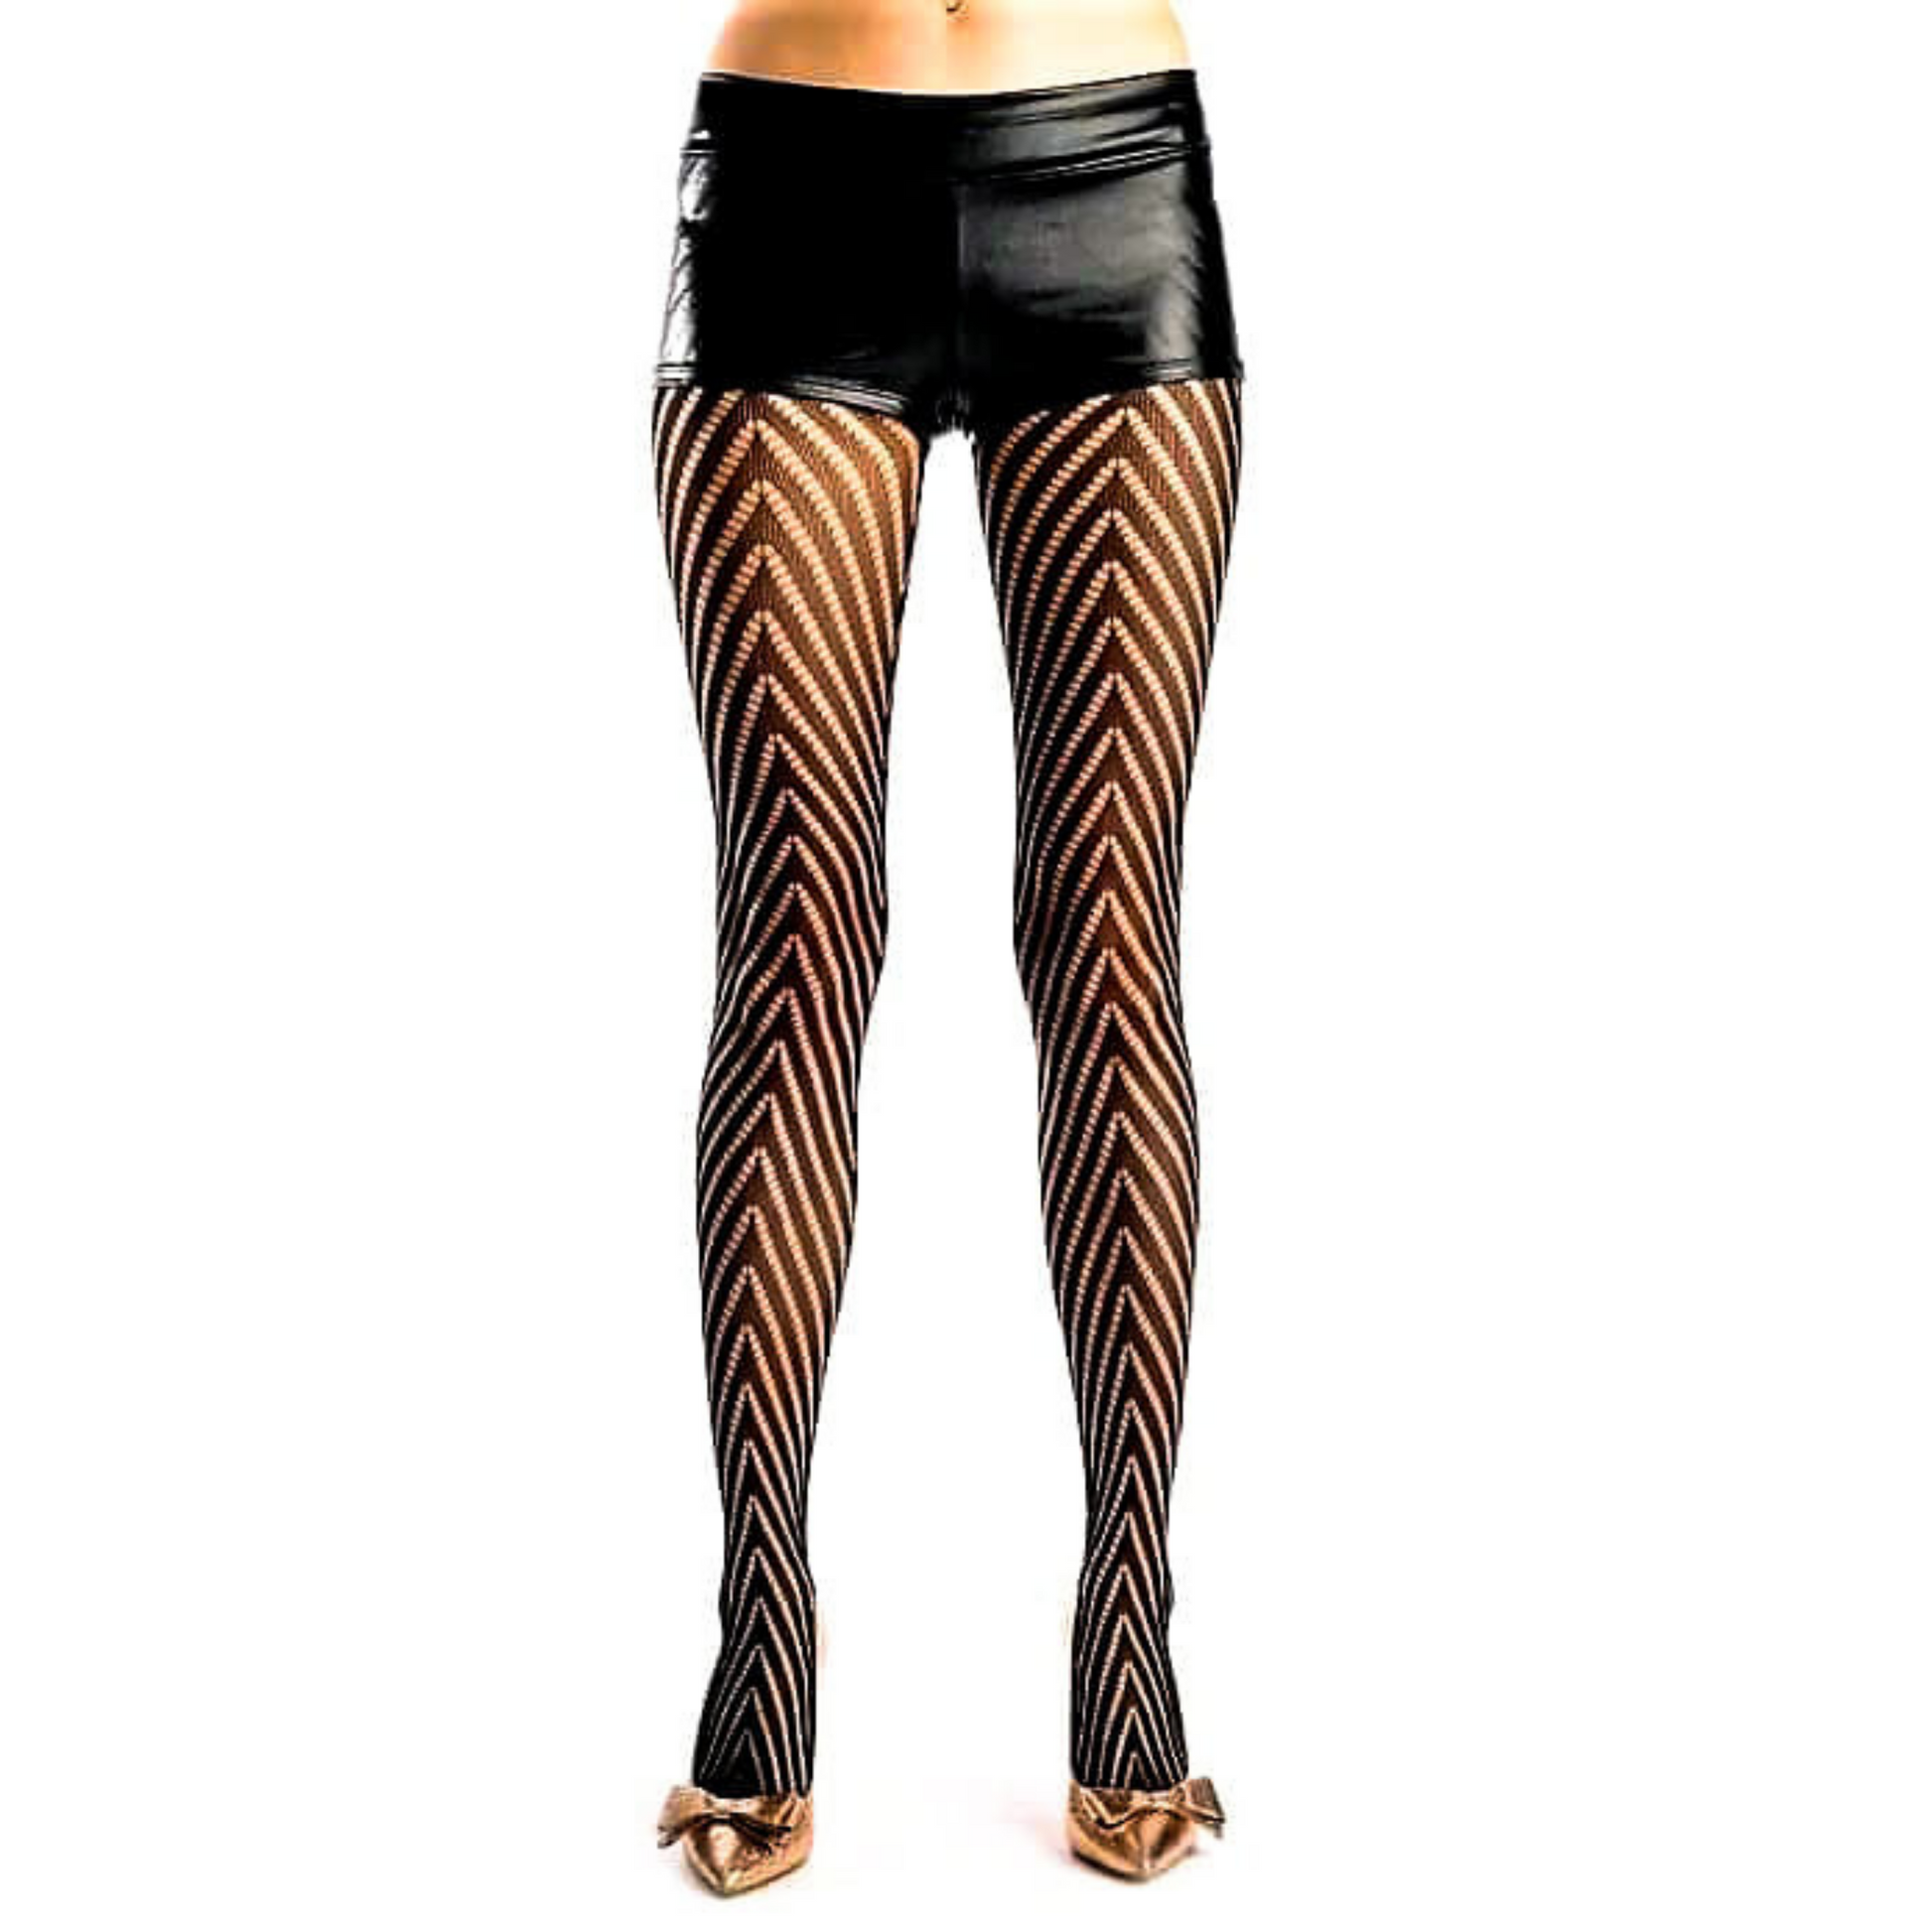 Fashion Pantyhose Black Knitted Zigzag Design (One Size Fits All)